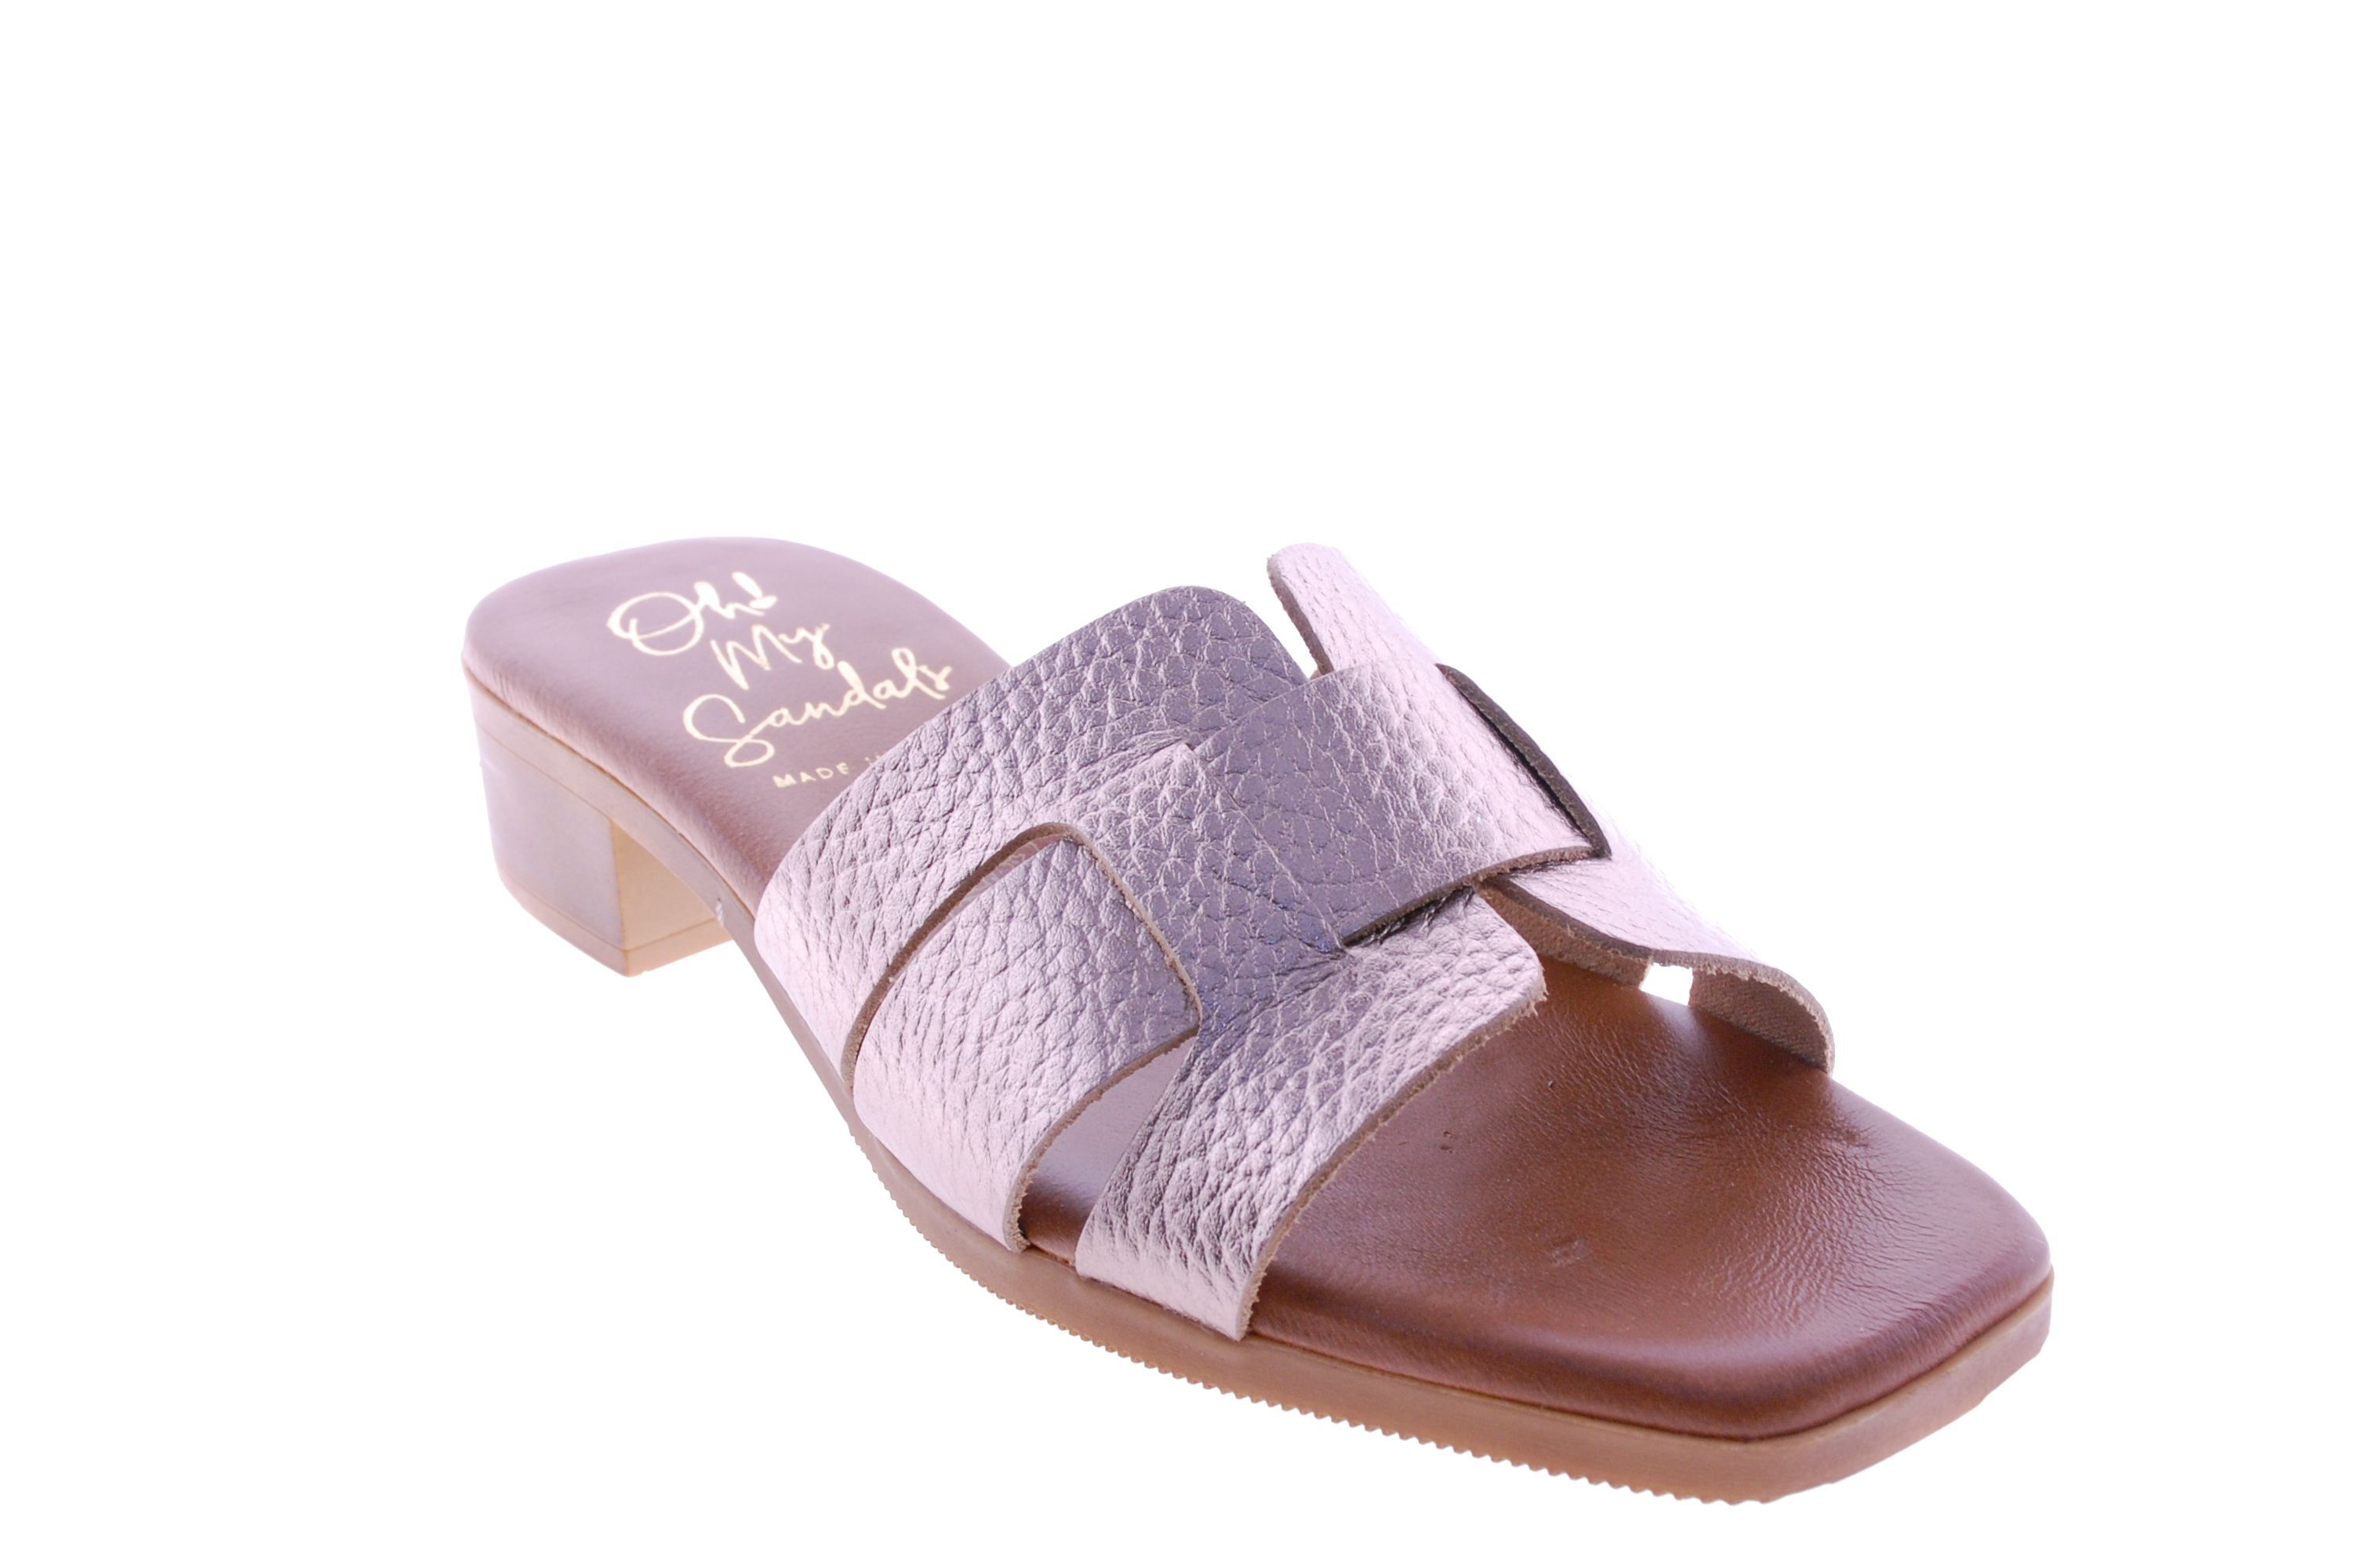 Oh My Sandals ! - Muil - Metalic - Brons